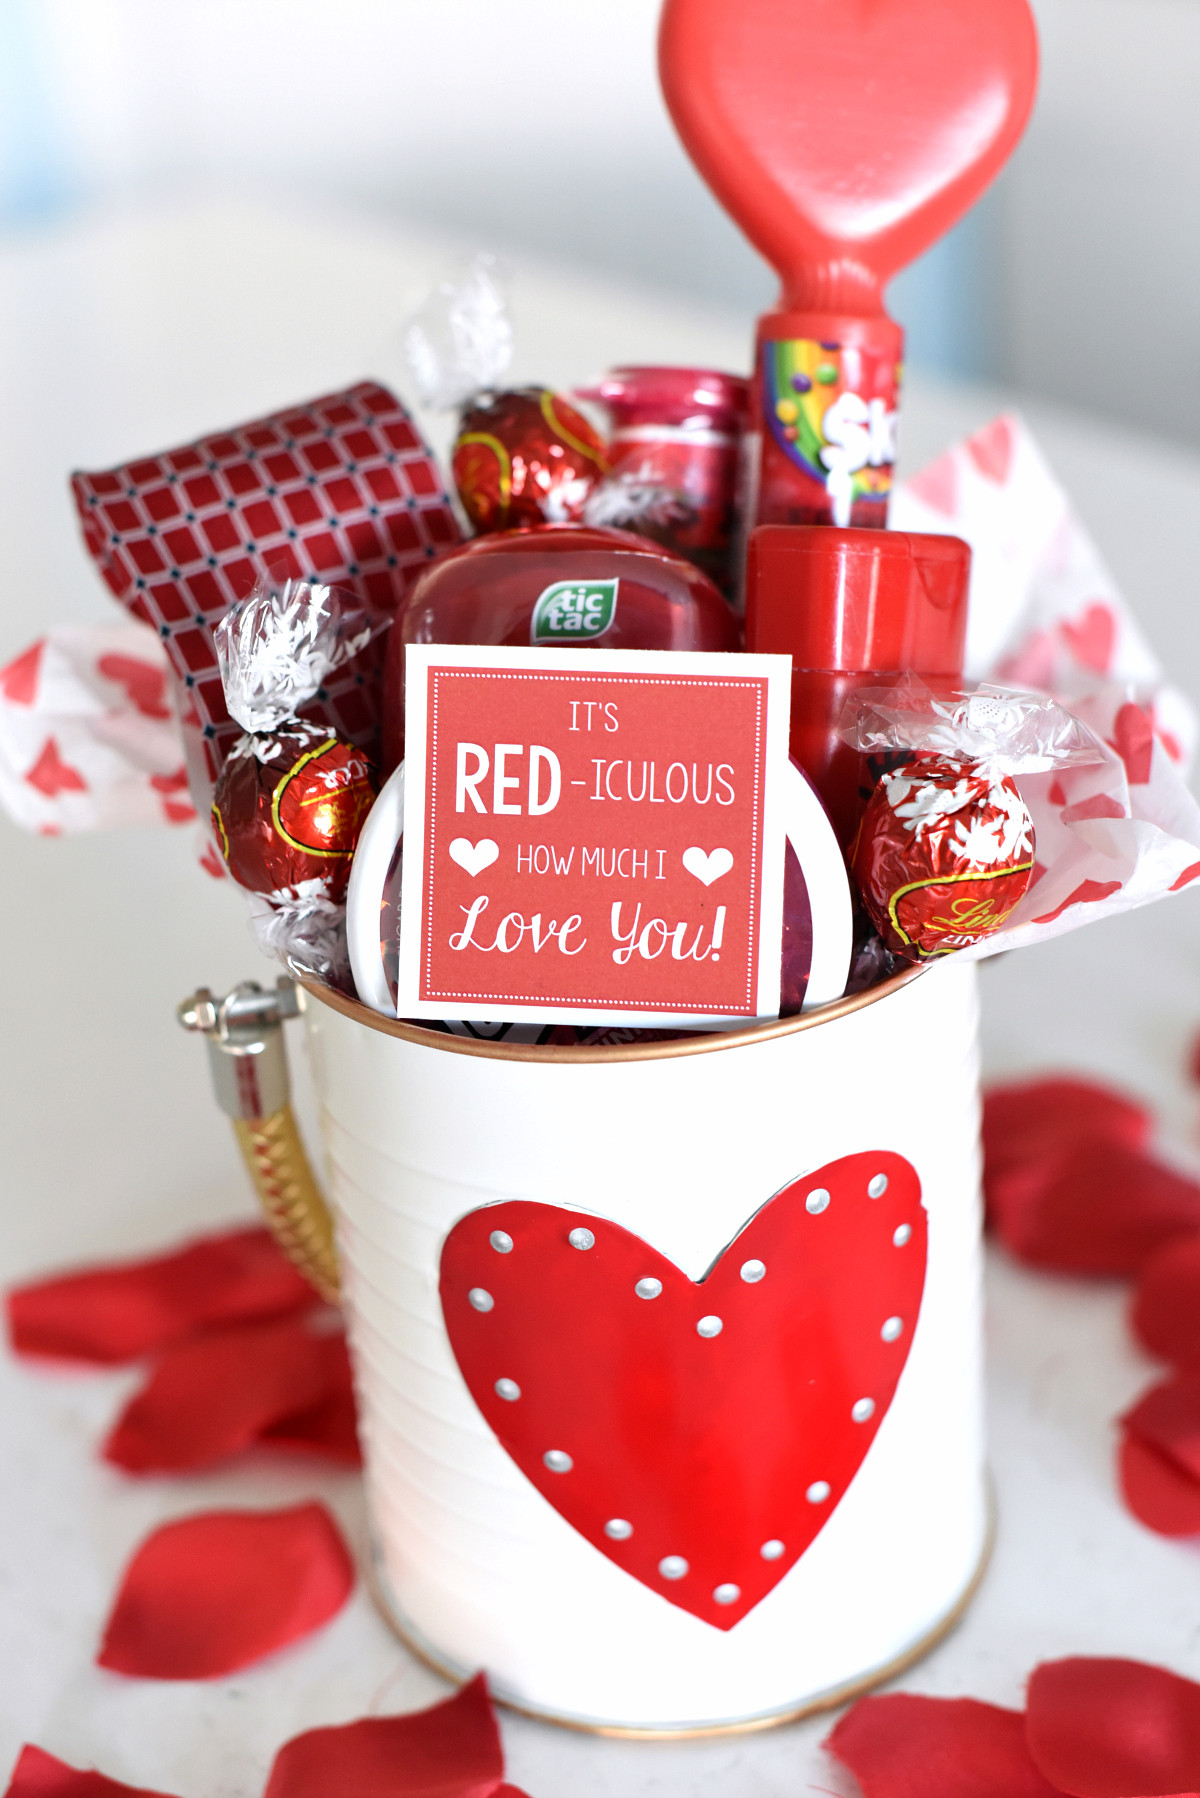 Funny Valentines Gift Ideas
 25 DIY Valentine s Day Gift Ideas Teens Will Love